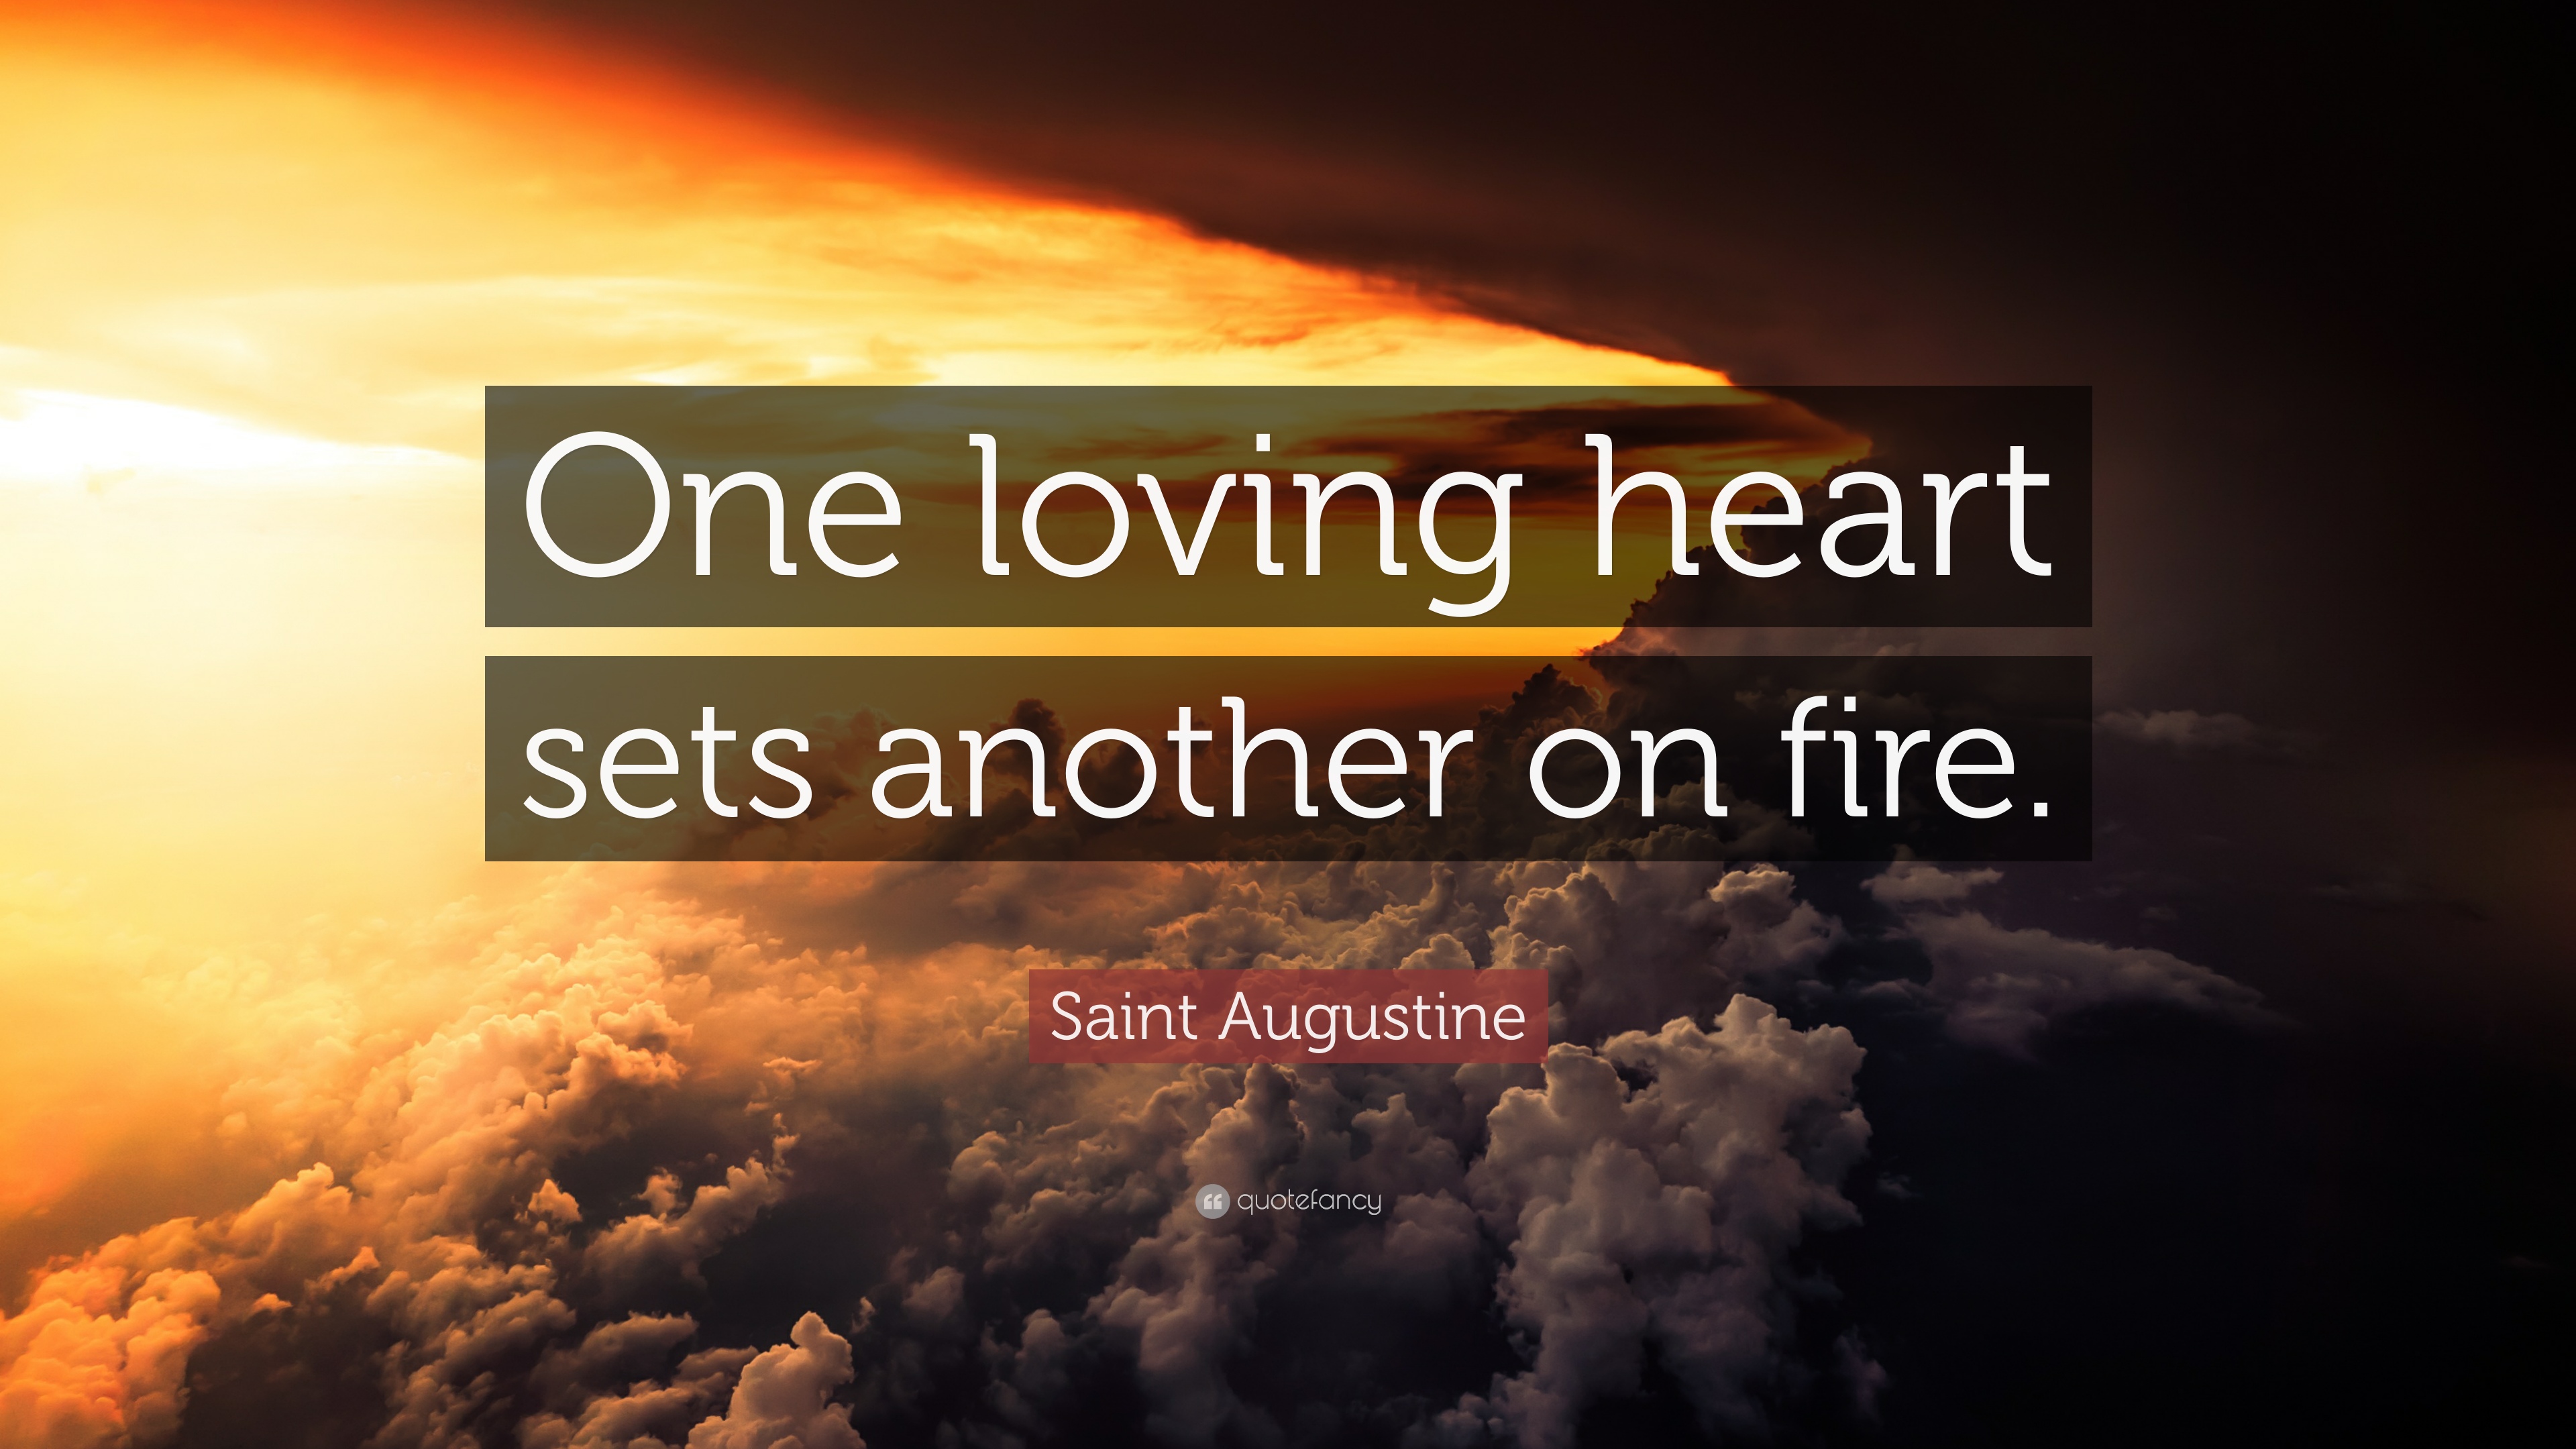 Saint Augustine Quote: “One loving heart sets another